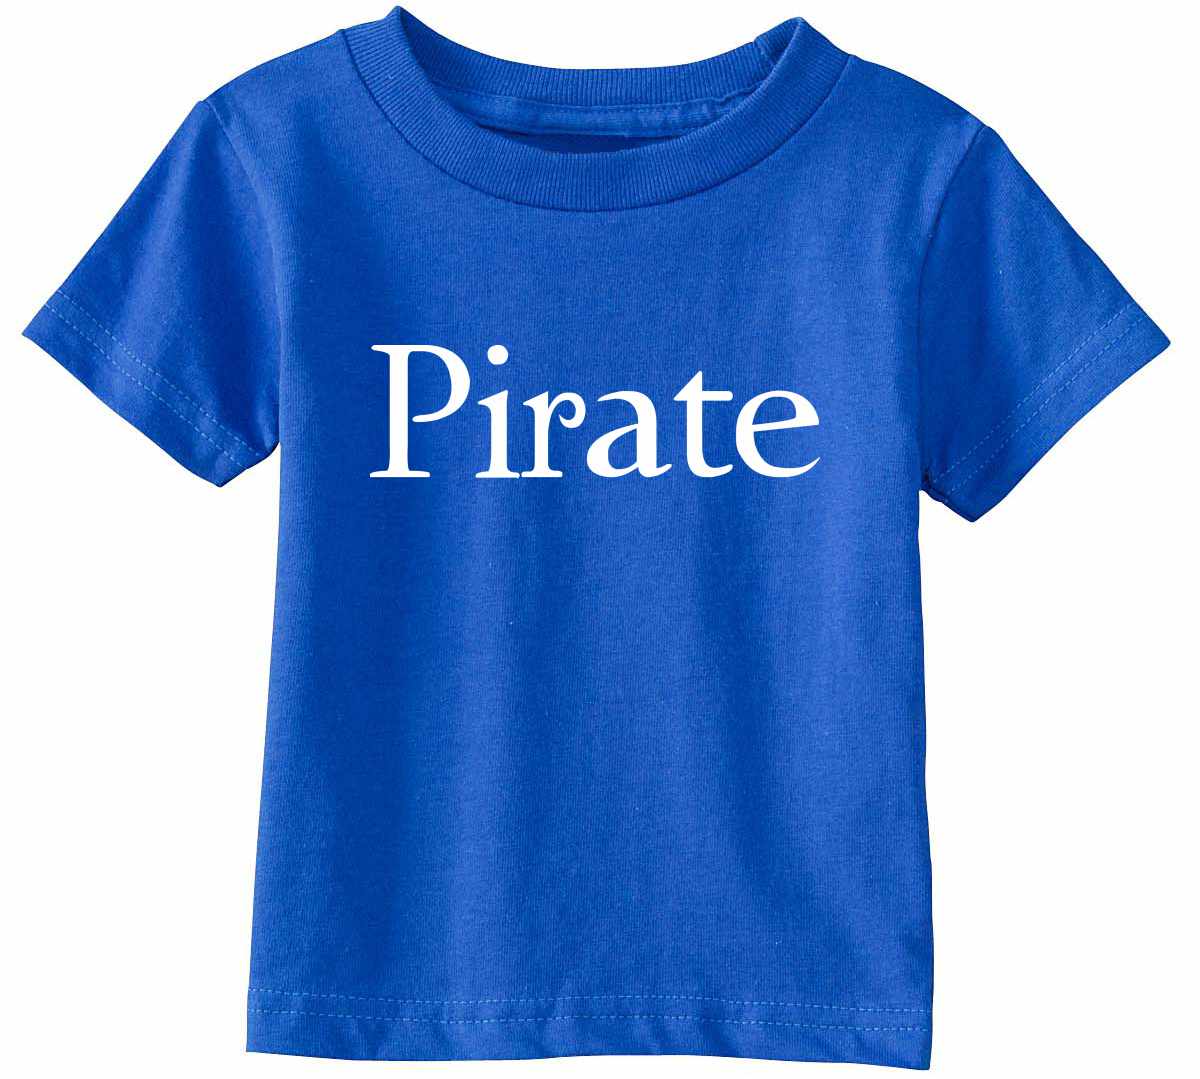 Pirate Infant/Toddler  (#620-7)